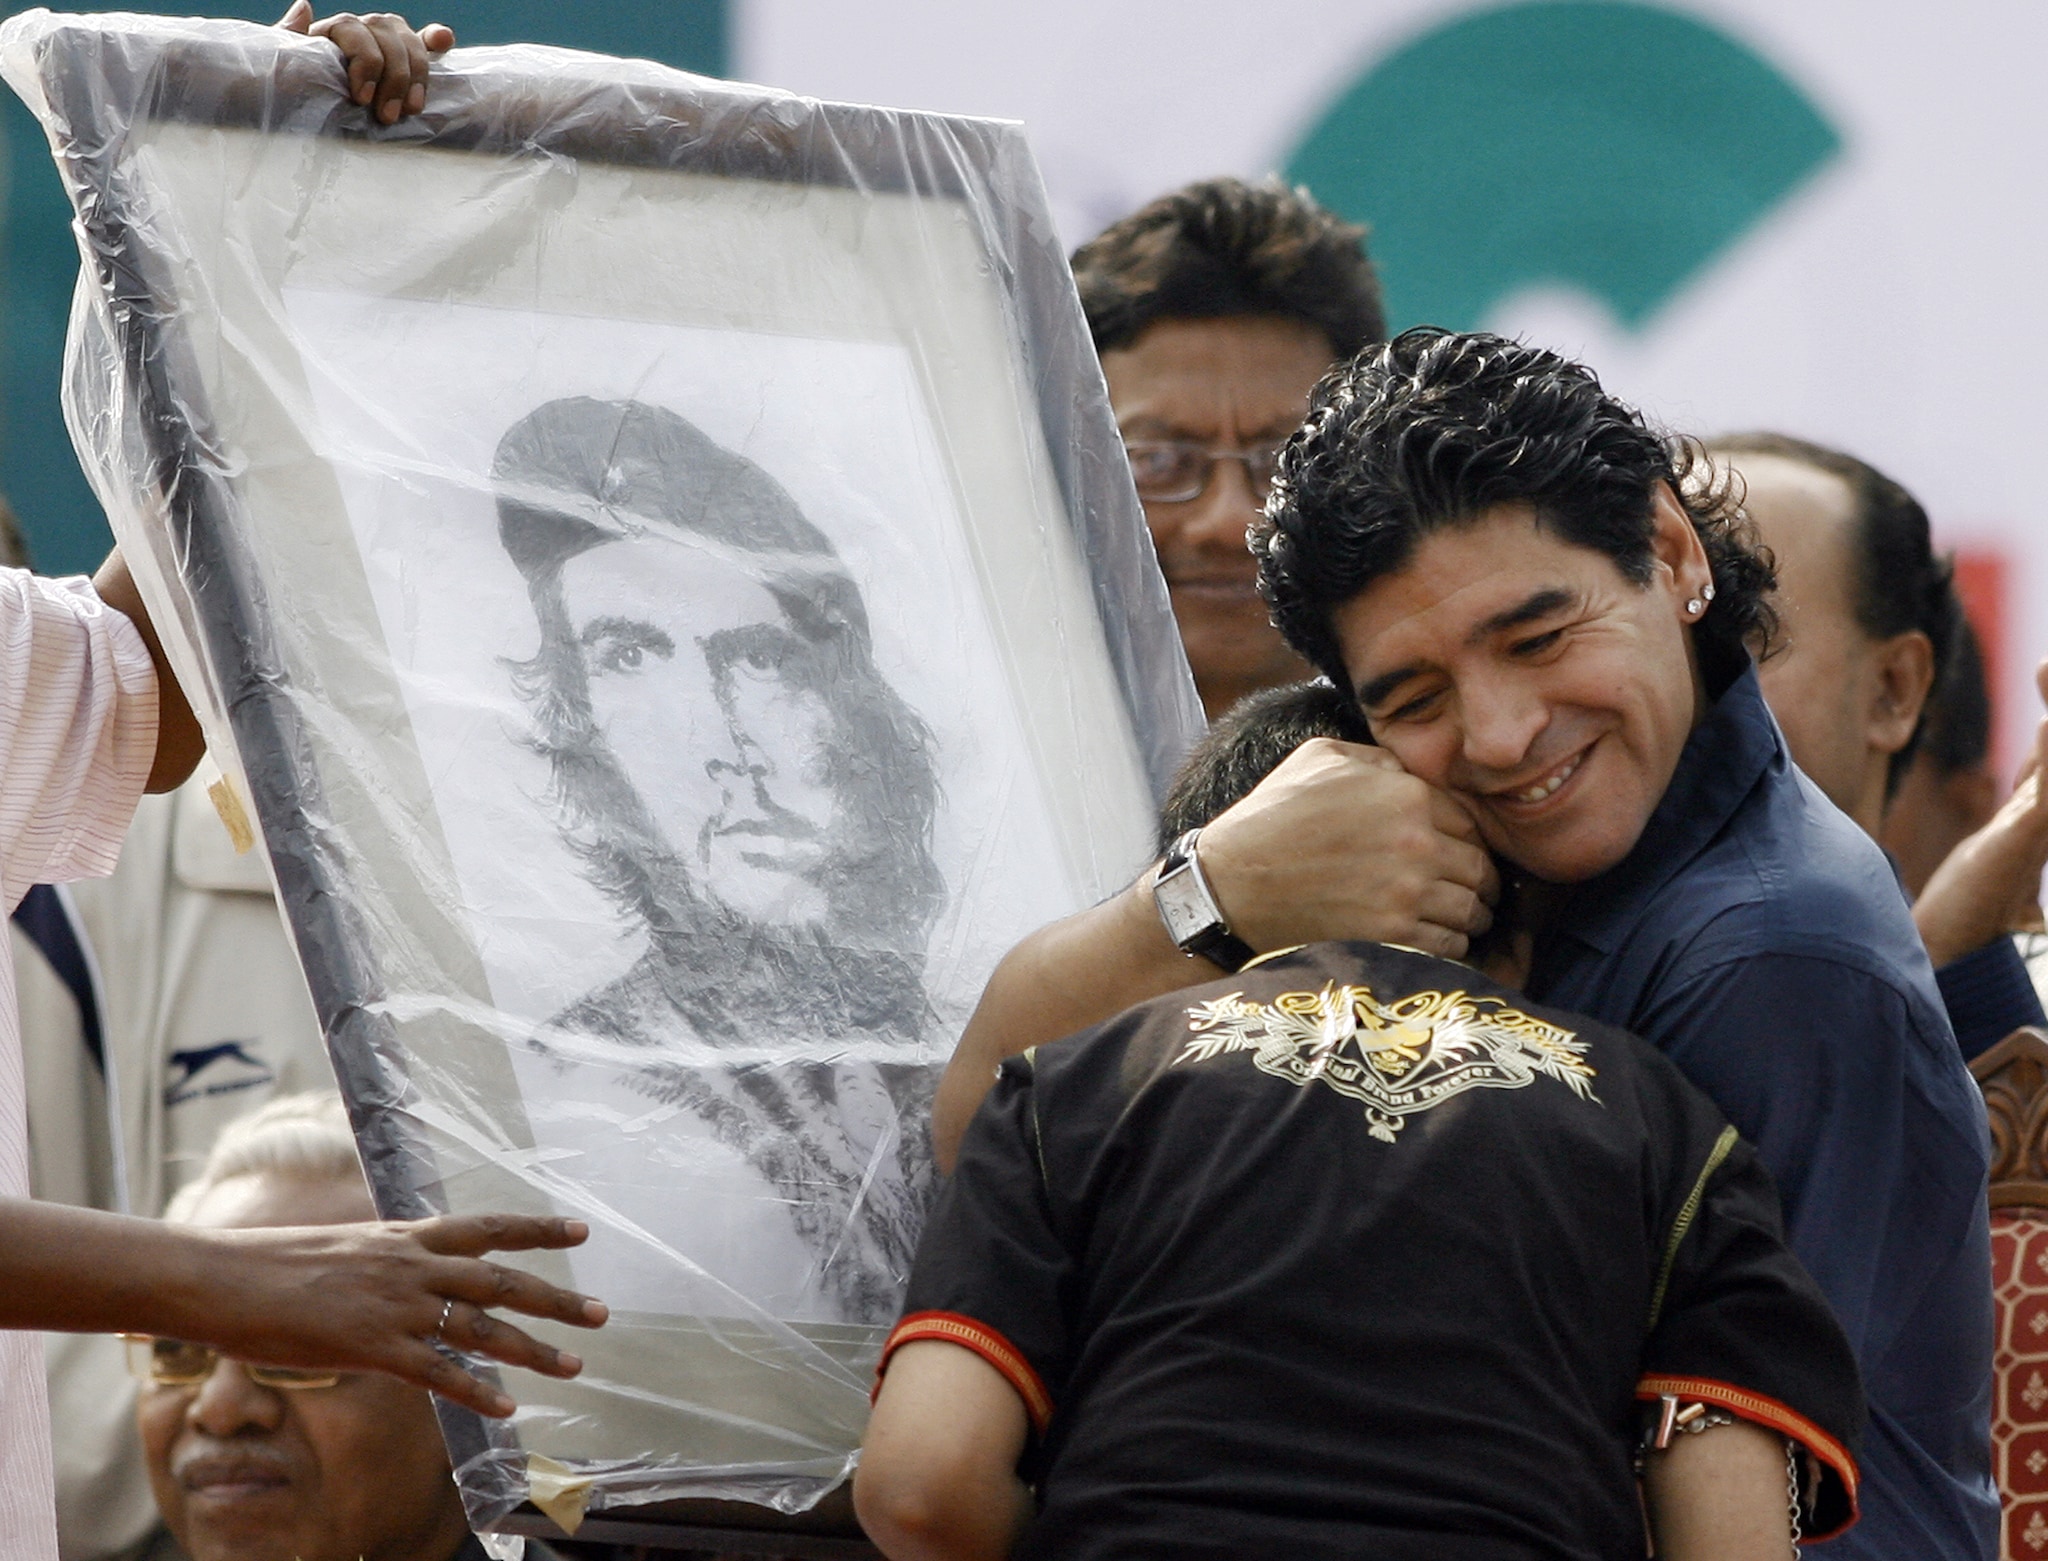  Argentina's national football team coach and former football star Diego Armando Maradona (R) greets the young artist who painted and presented him with a portrait of revolutionary Che Guevara during the laying of the foundation stone for the Indian Football School at Maheshtala, on the outskirts of Kolkata on December 6, 2008. Maradona laid the foundation stone of the Indian Football School (IFS) on the first day of his two-day visit to the city of Kolkata. AFP PHOTO/Deshakalyan CHOWDHURY (Photo: AFP)